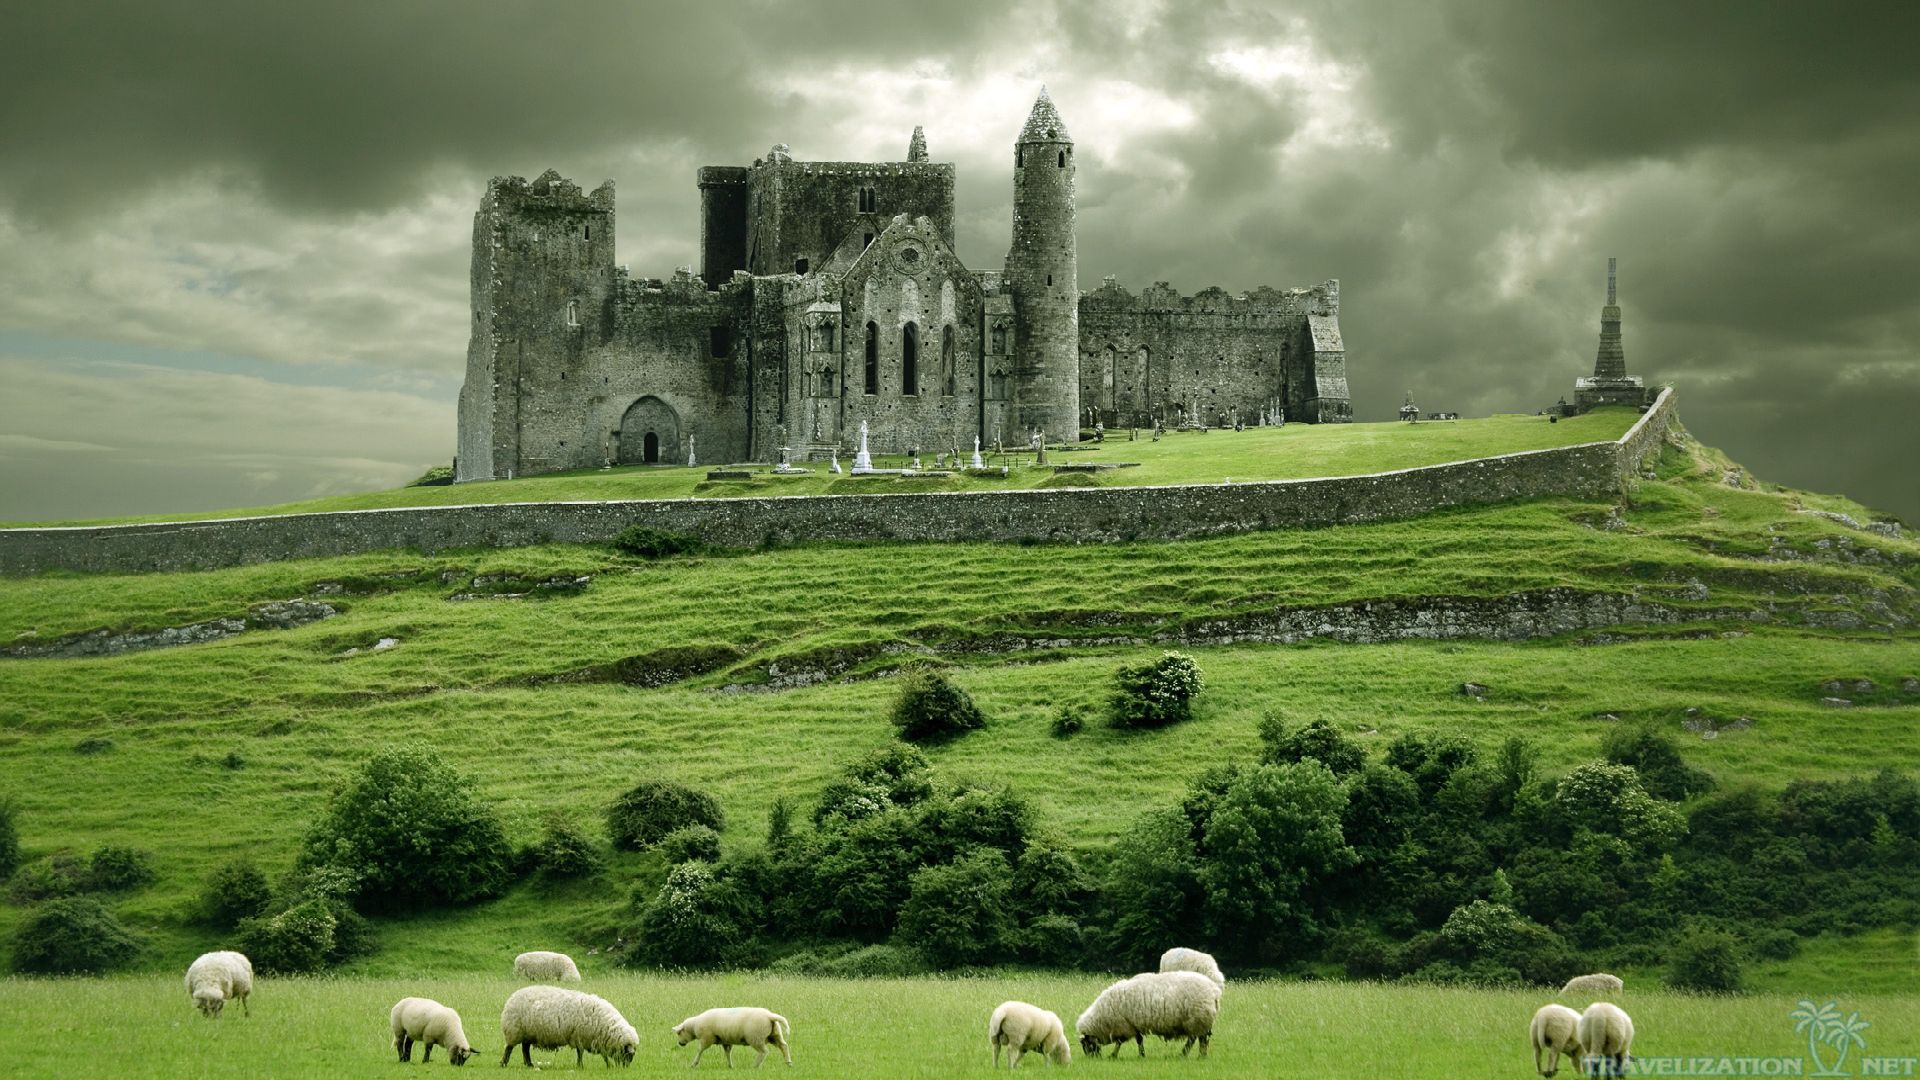 And Castles Sheep